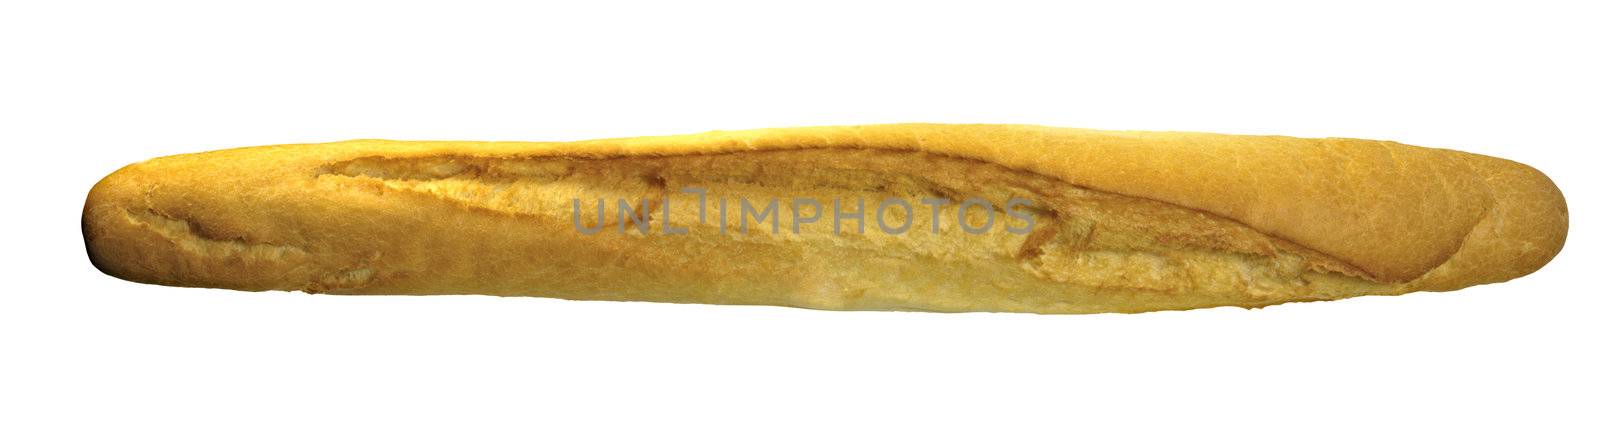 long loaf isolated on white background by ozaiachin